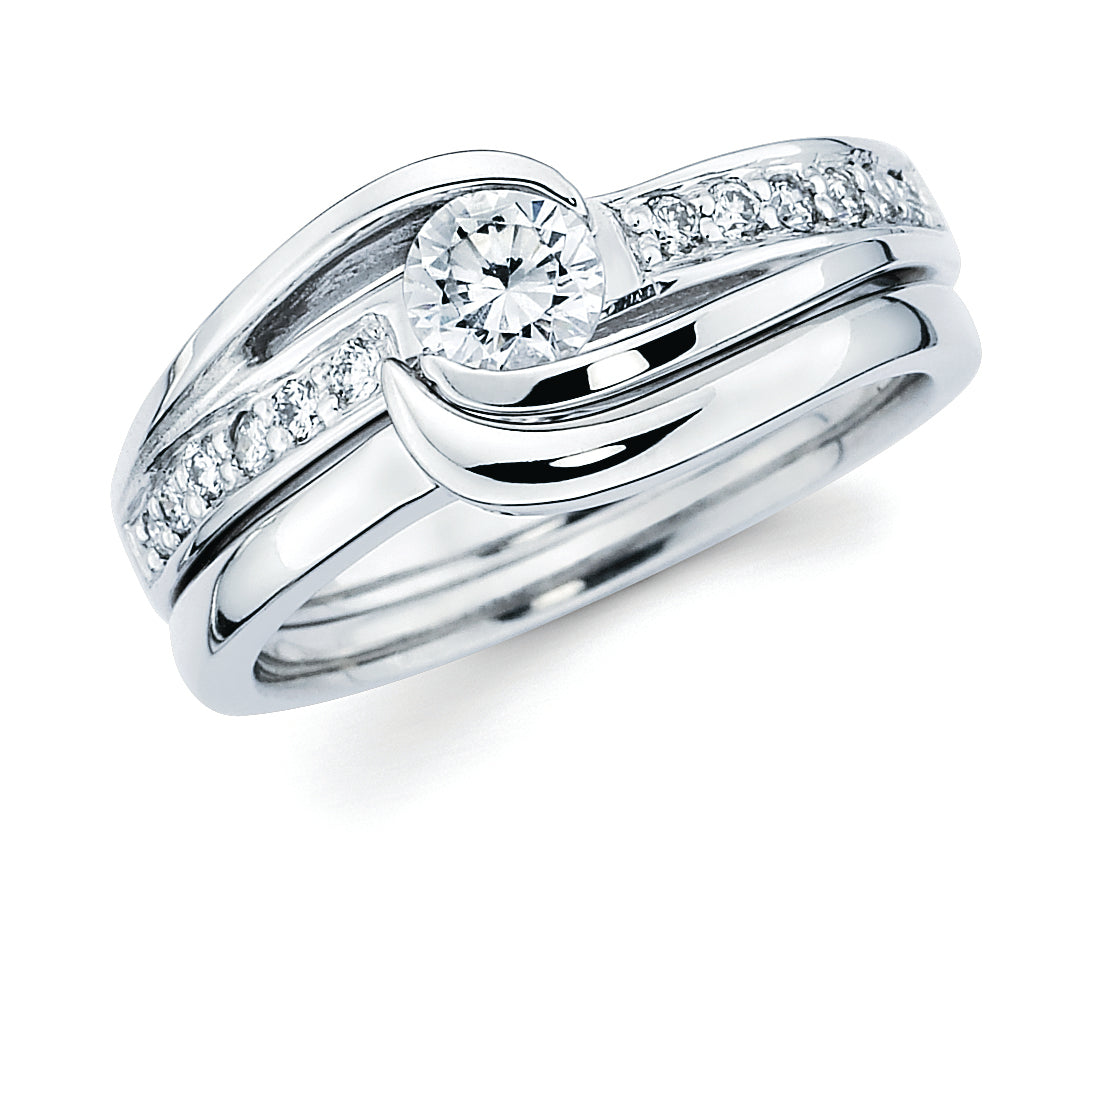 Modern Bridal: .015 Ctw. Diamond Semi Mount available for 3/8 Ct. Round Center Diamond in 14K Gold